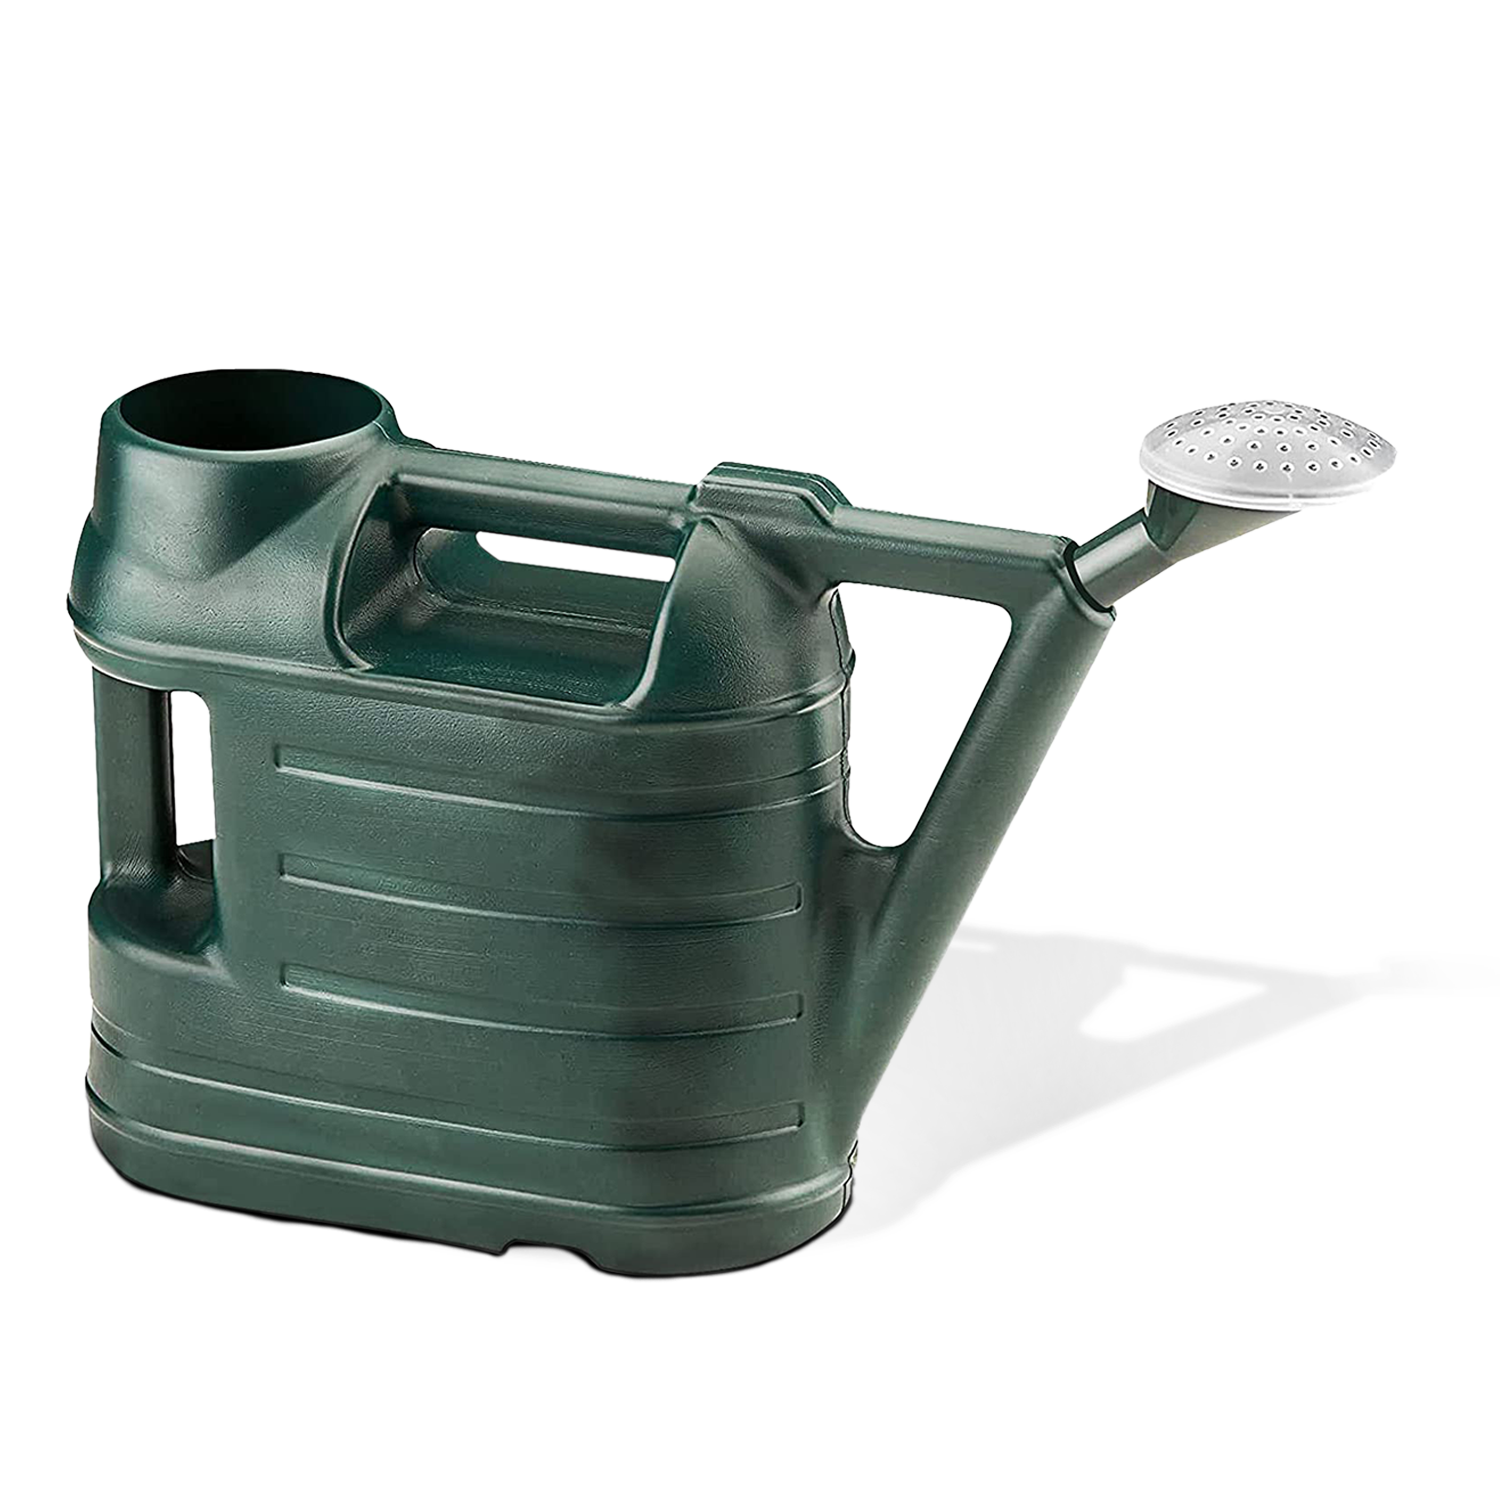 Garden Watering Can with Sprinkler Head - Large Capacity Strong Plastic Watering Can